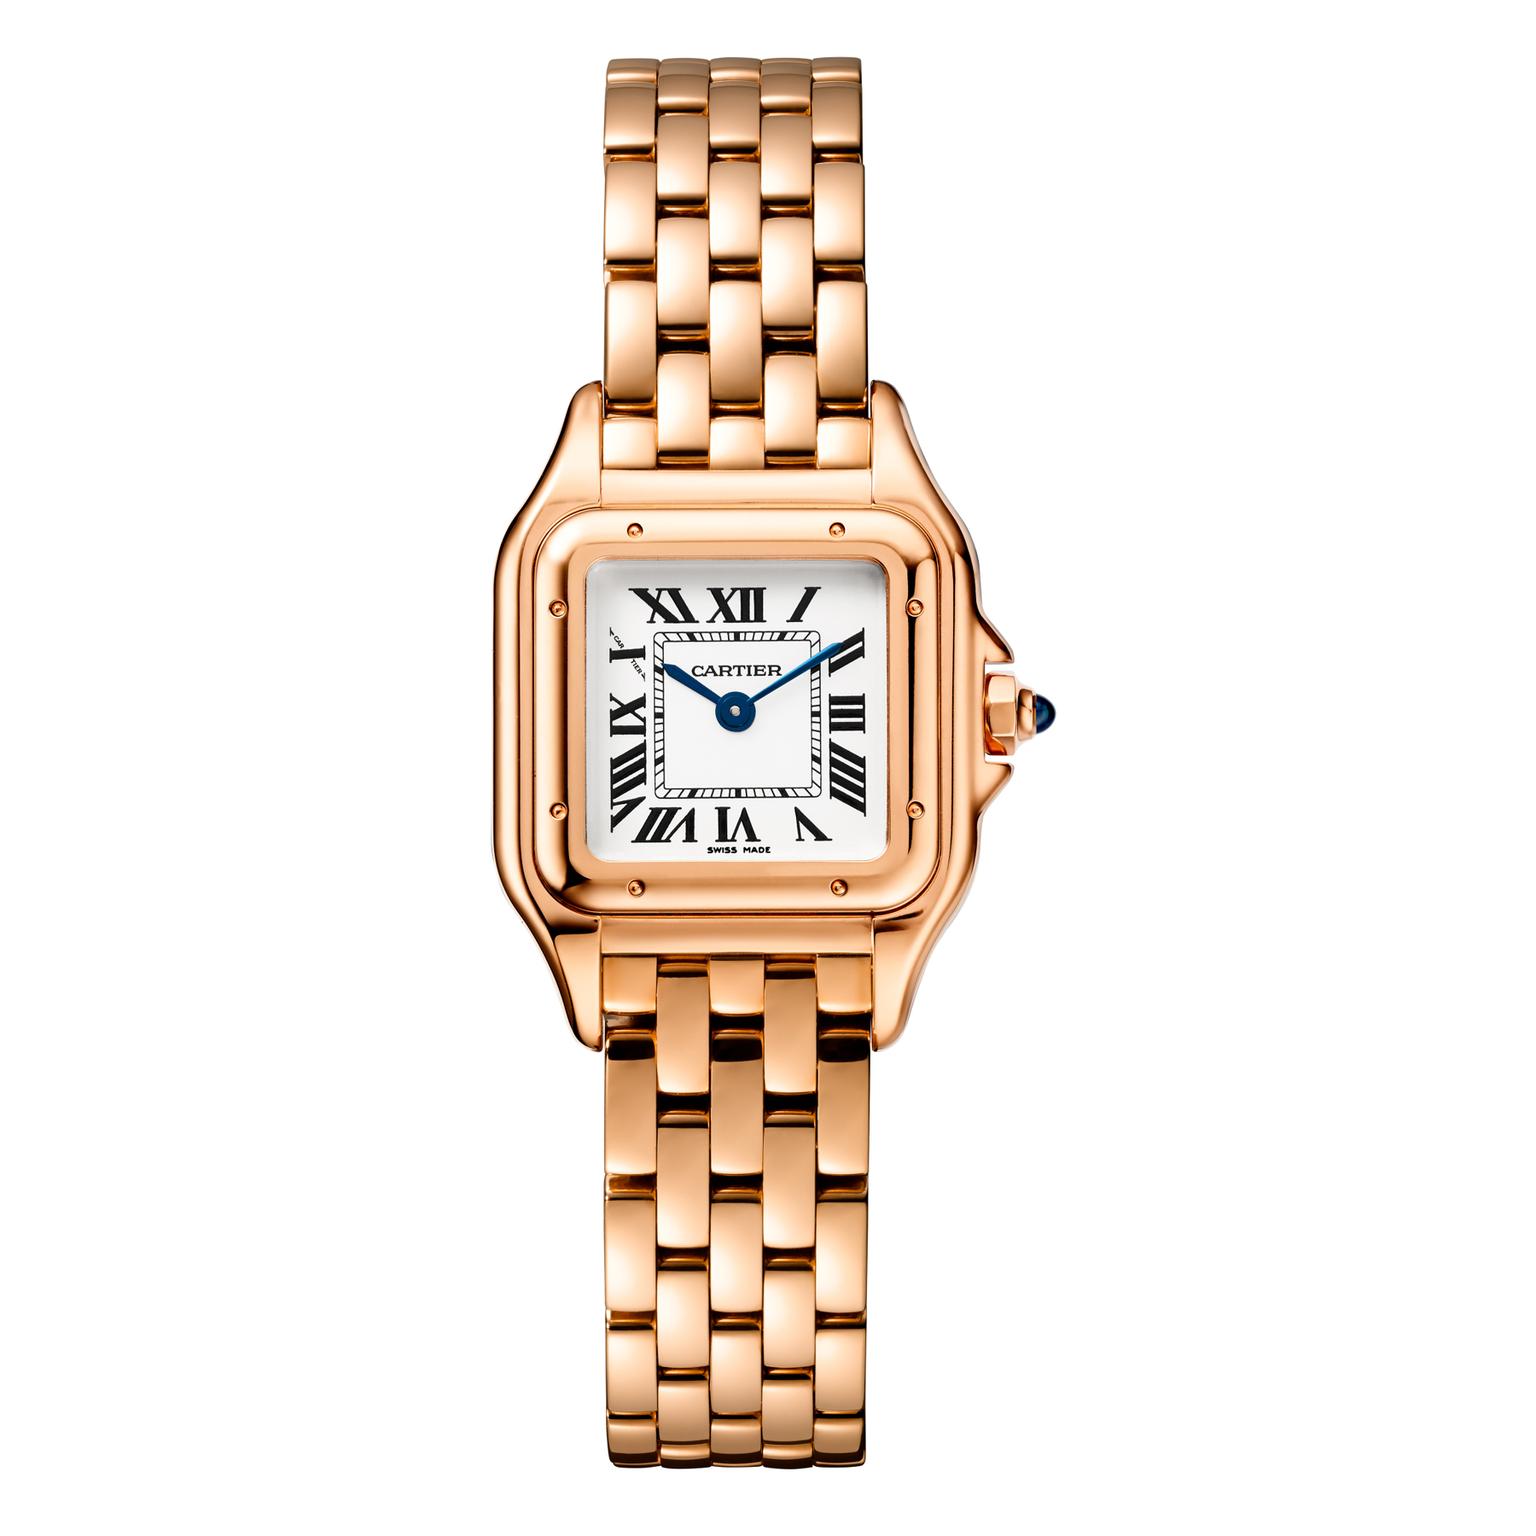 Small size Panthère de Cartier watch in rose gold 